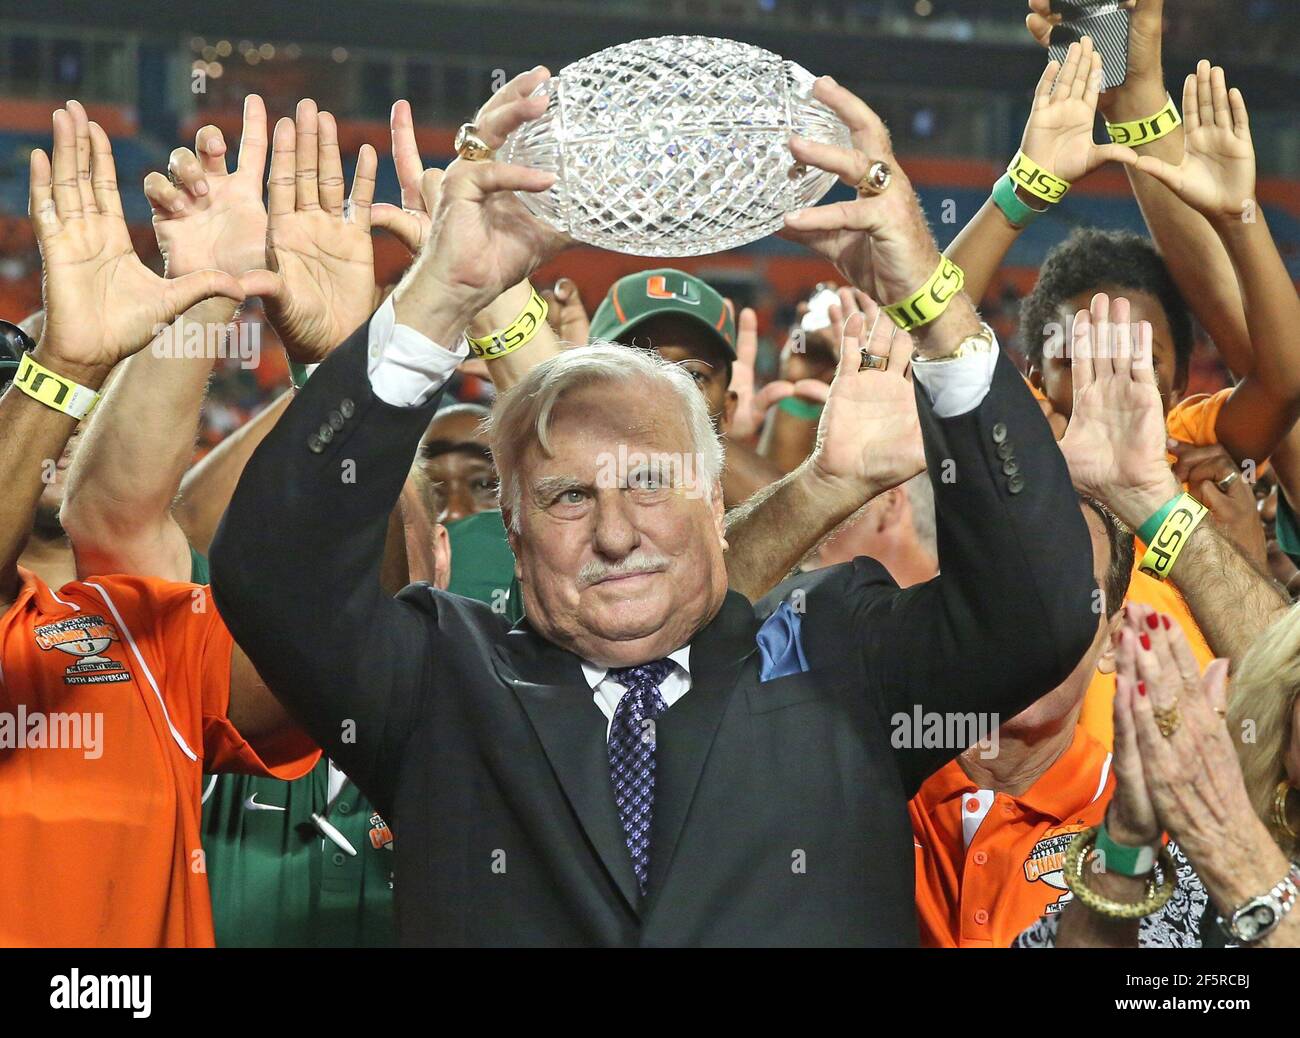 Miami Gardens, USA. 30th Aug, 2013. Former Miami coach Howard Schnellenberger raises the 1983 NCAA National Championship trophy during a halftime ceremony during action against Florida Atlantic at Sun Life Stadium in Miami Gardens, Florida, on Aug. 30, 2013. (Photo by Al Diaz/Miami Herald/TNS/Sipa USA) Credit: Sipa USA/Alamy Live News Stock Photo